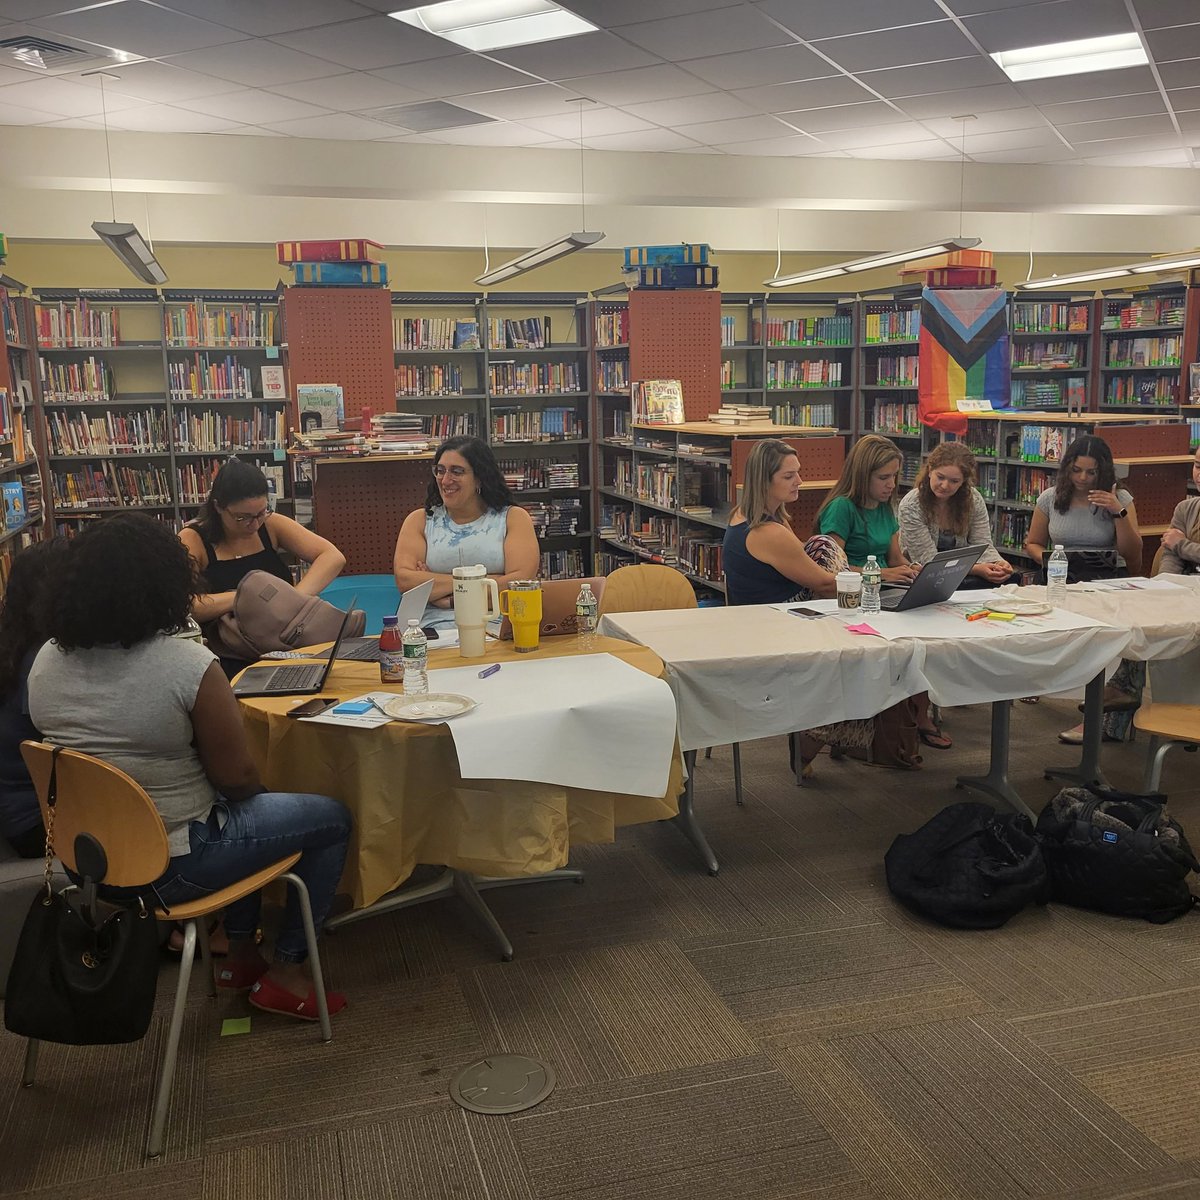 @Olaculture #OPride for all the work completed during the two days of learning, collaborating and cultivating joy and connections while planning for the upcoming year..#equity @OssiningSchools @KimberlyMauri10 @ComSchoolLeader @SELinSchools @BlackSELHub